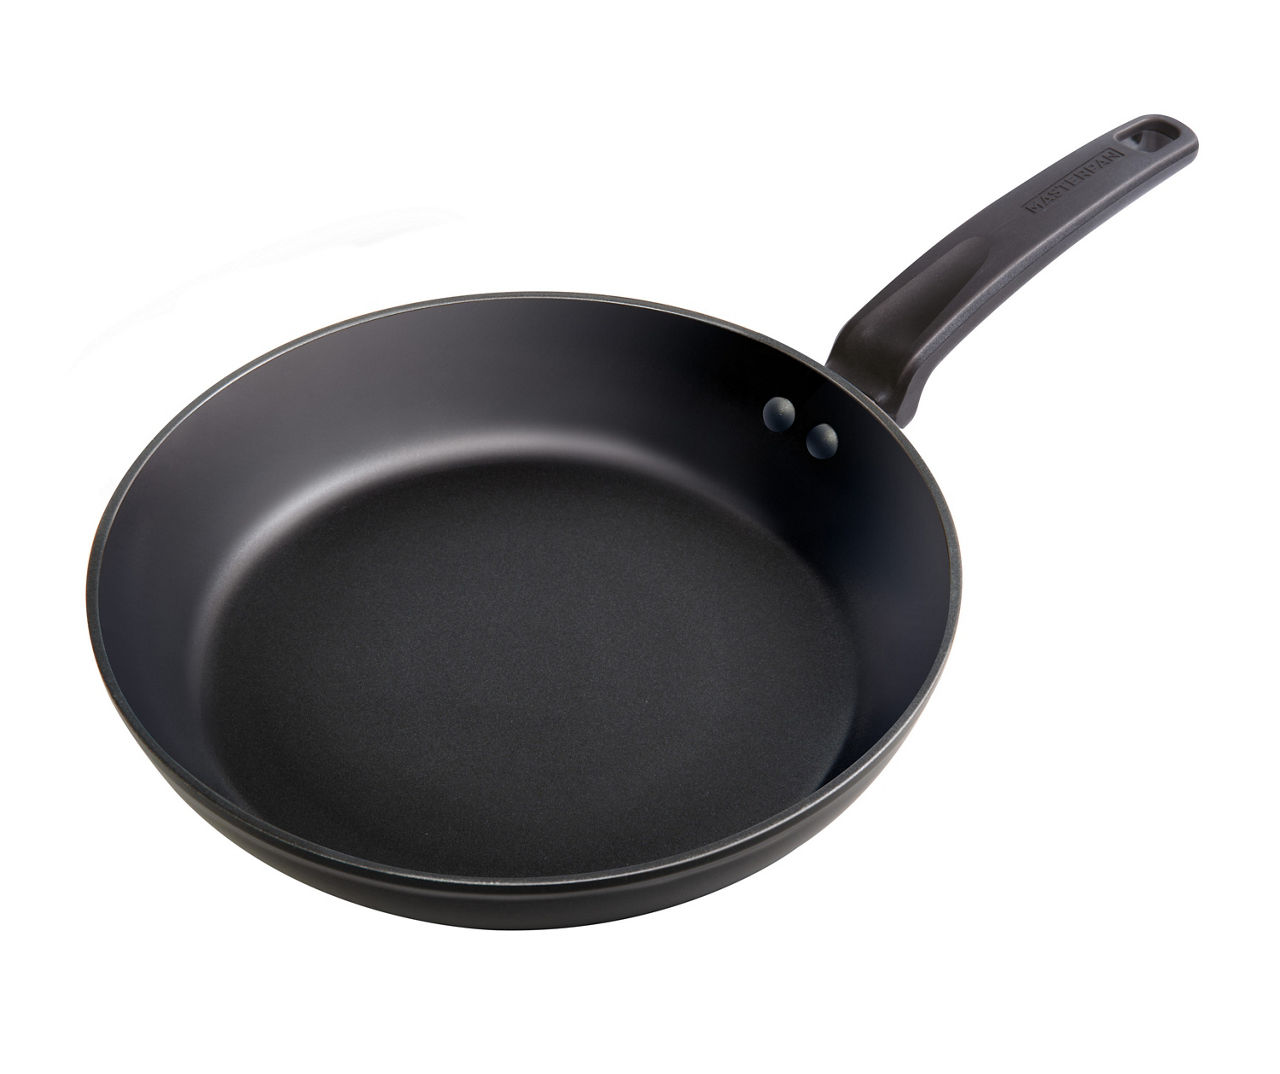 TEATULA Master Pan MP-5S 11 in. Non-Stick 3 Section Meal Skillet, Black